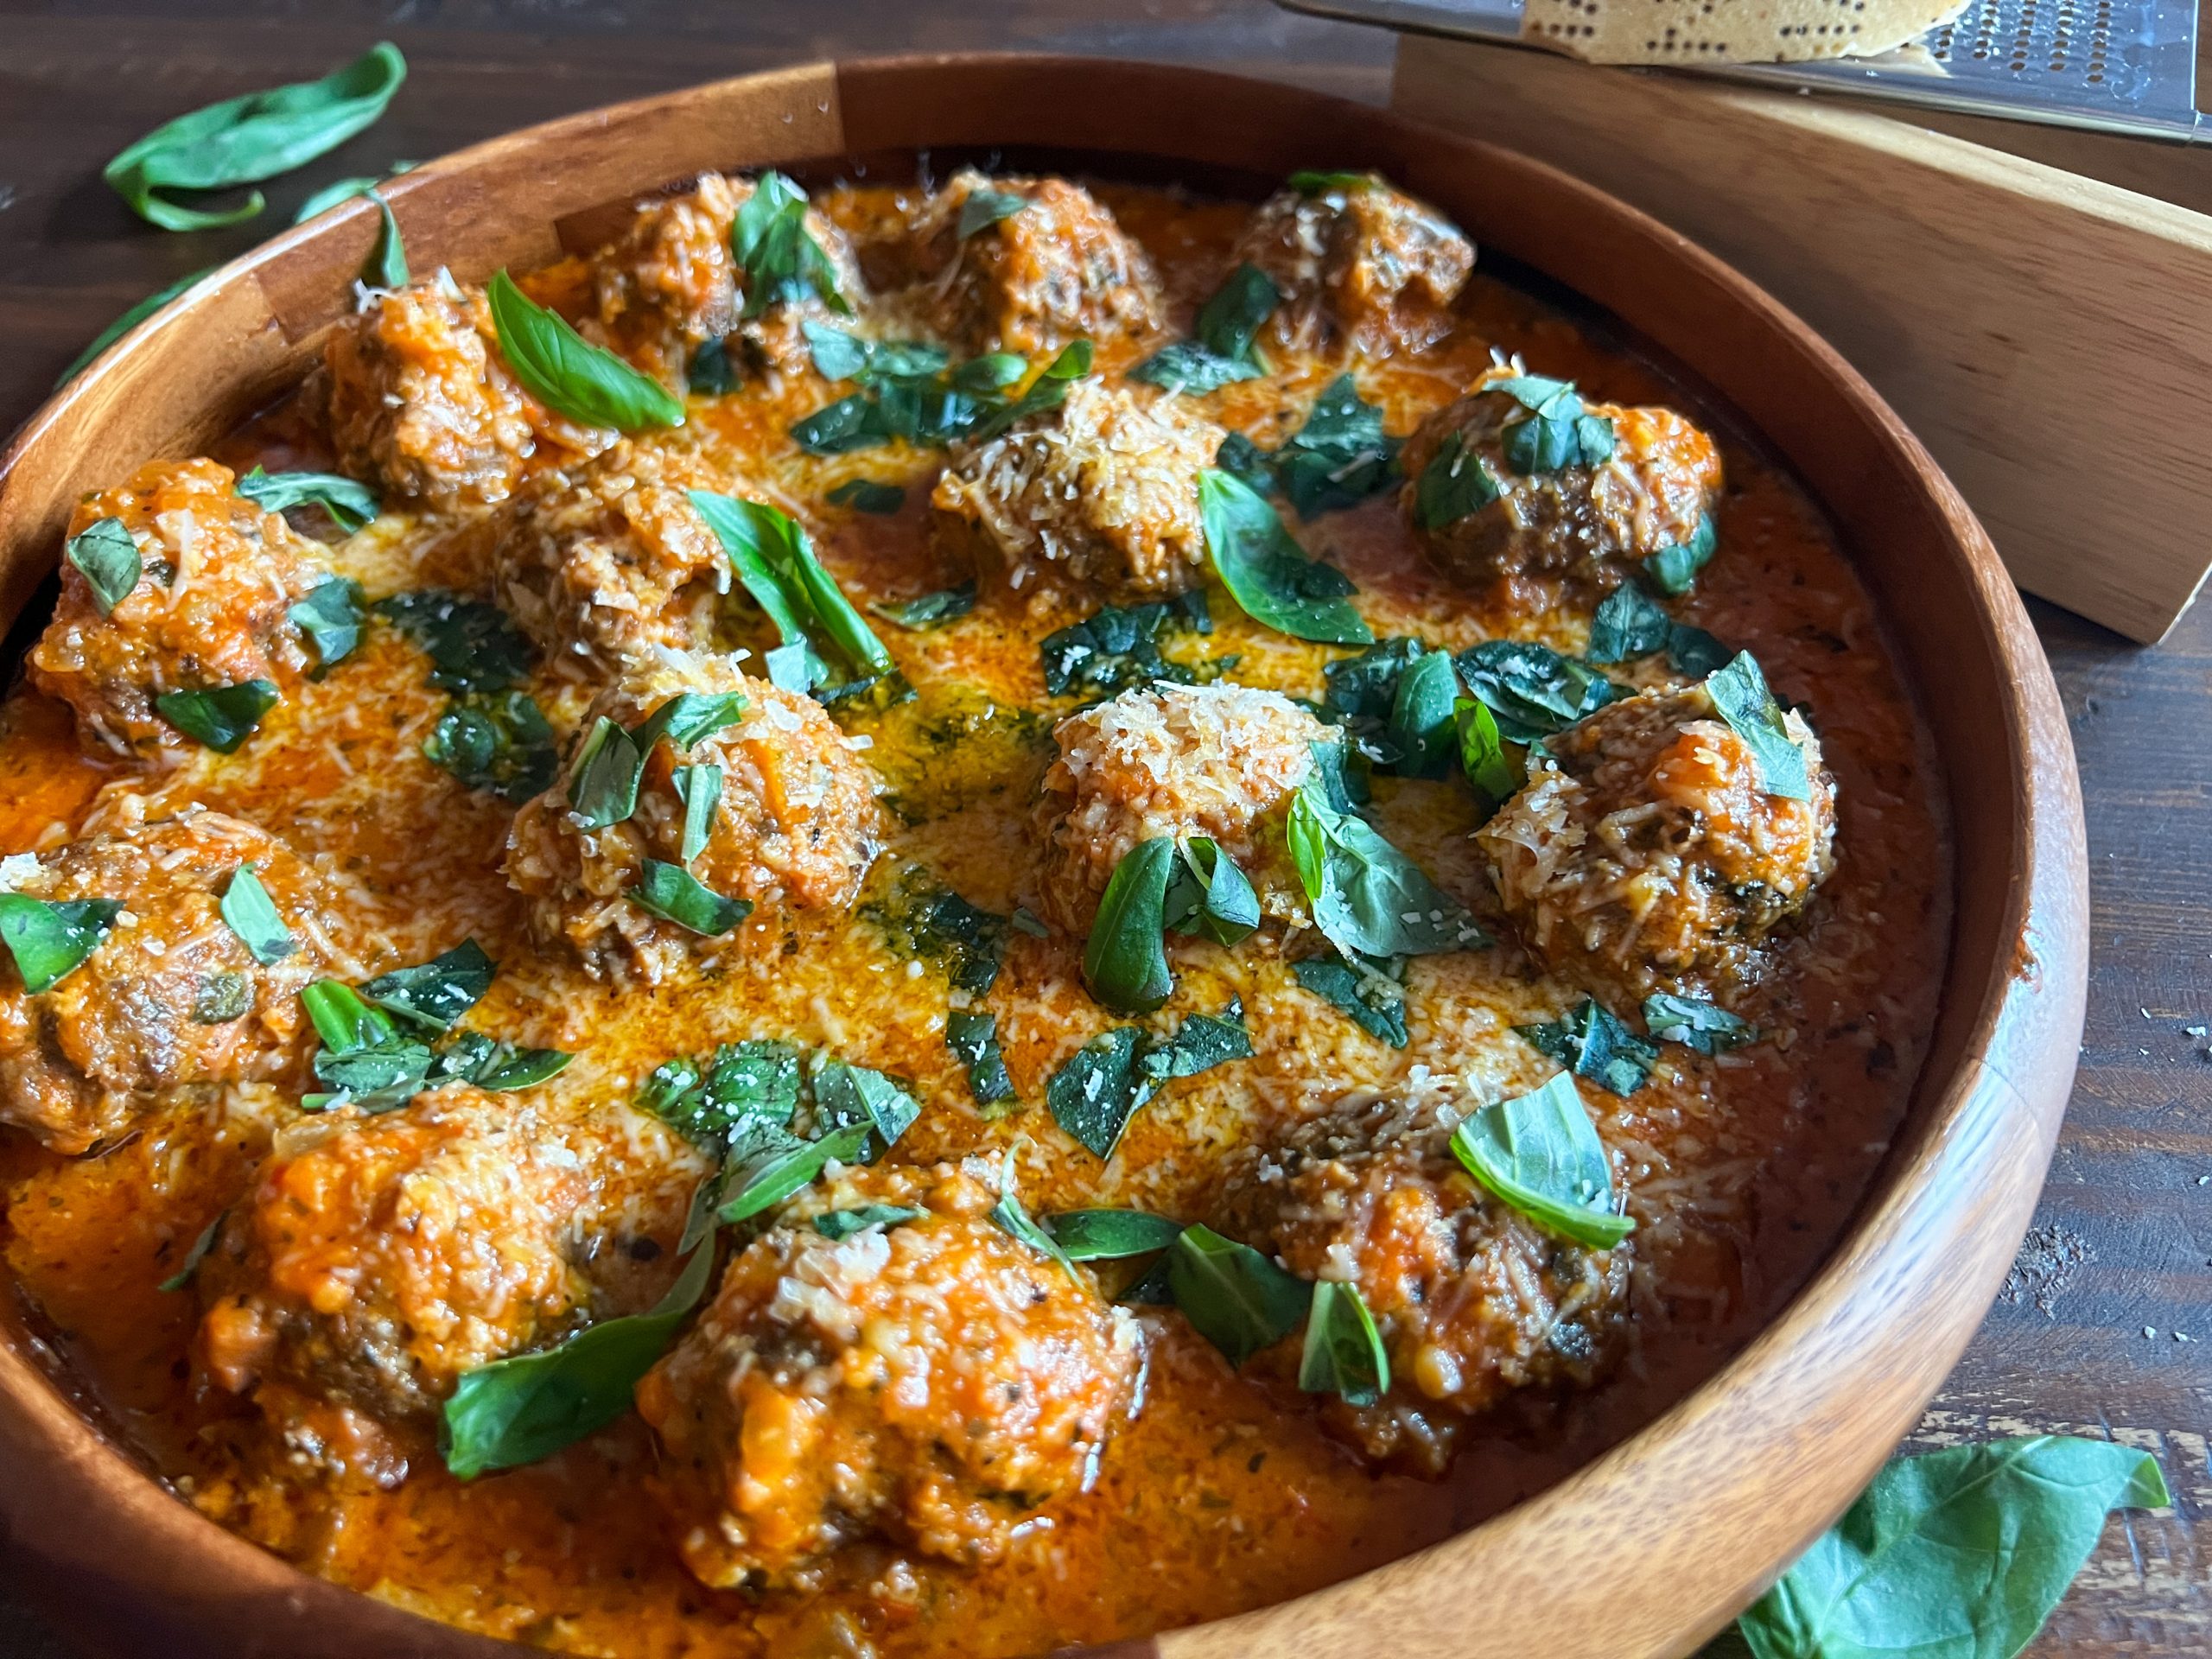 Mortadella & Beef Meatballs with a Roasted Red Pepper Sauce